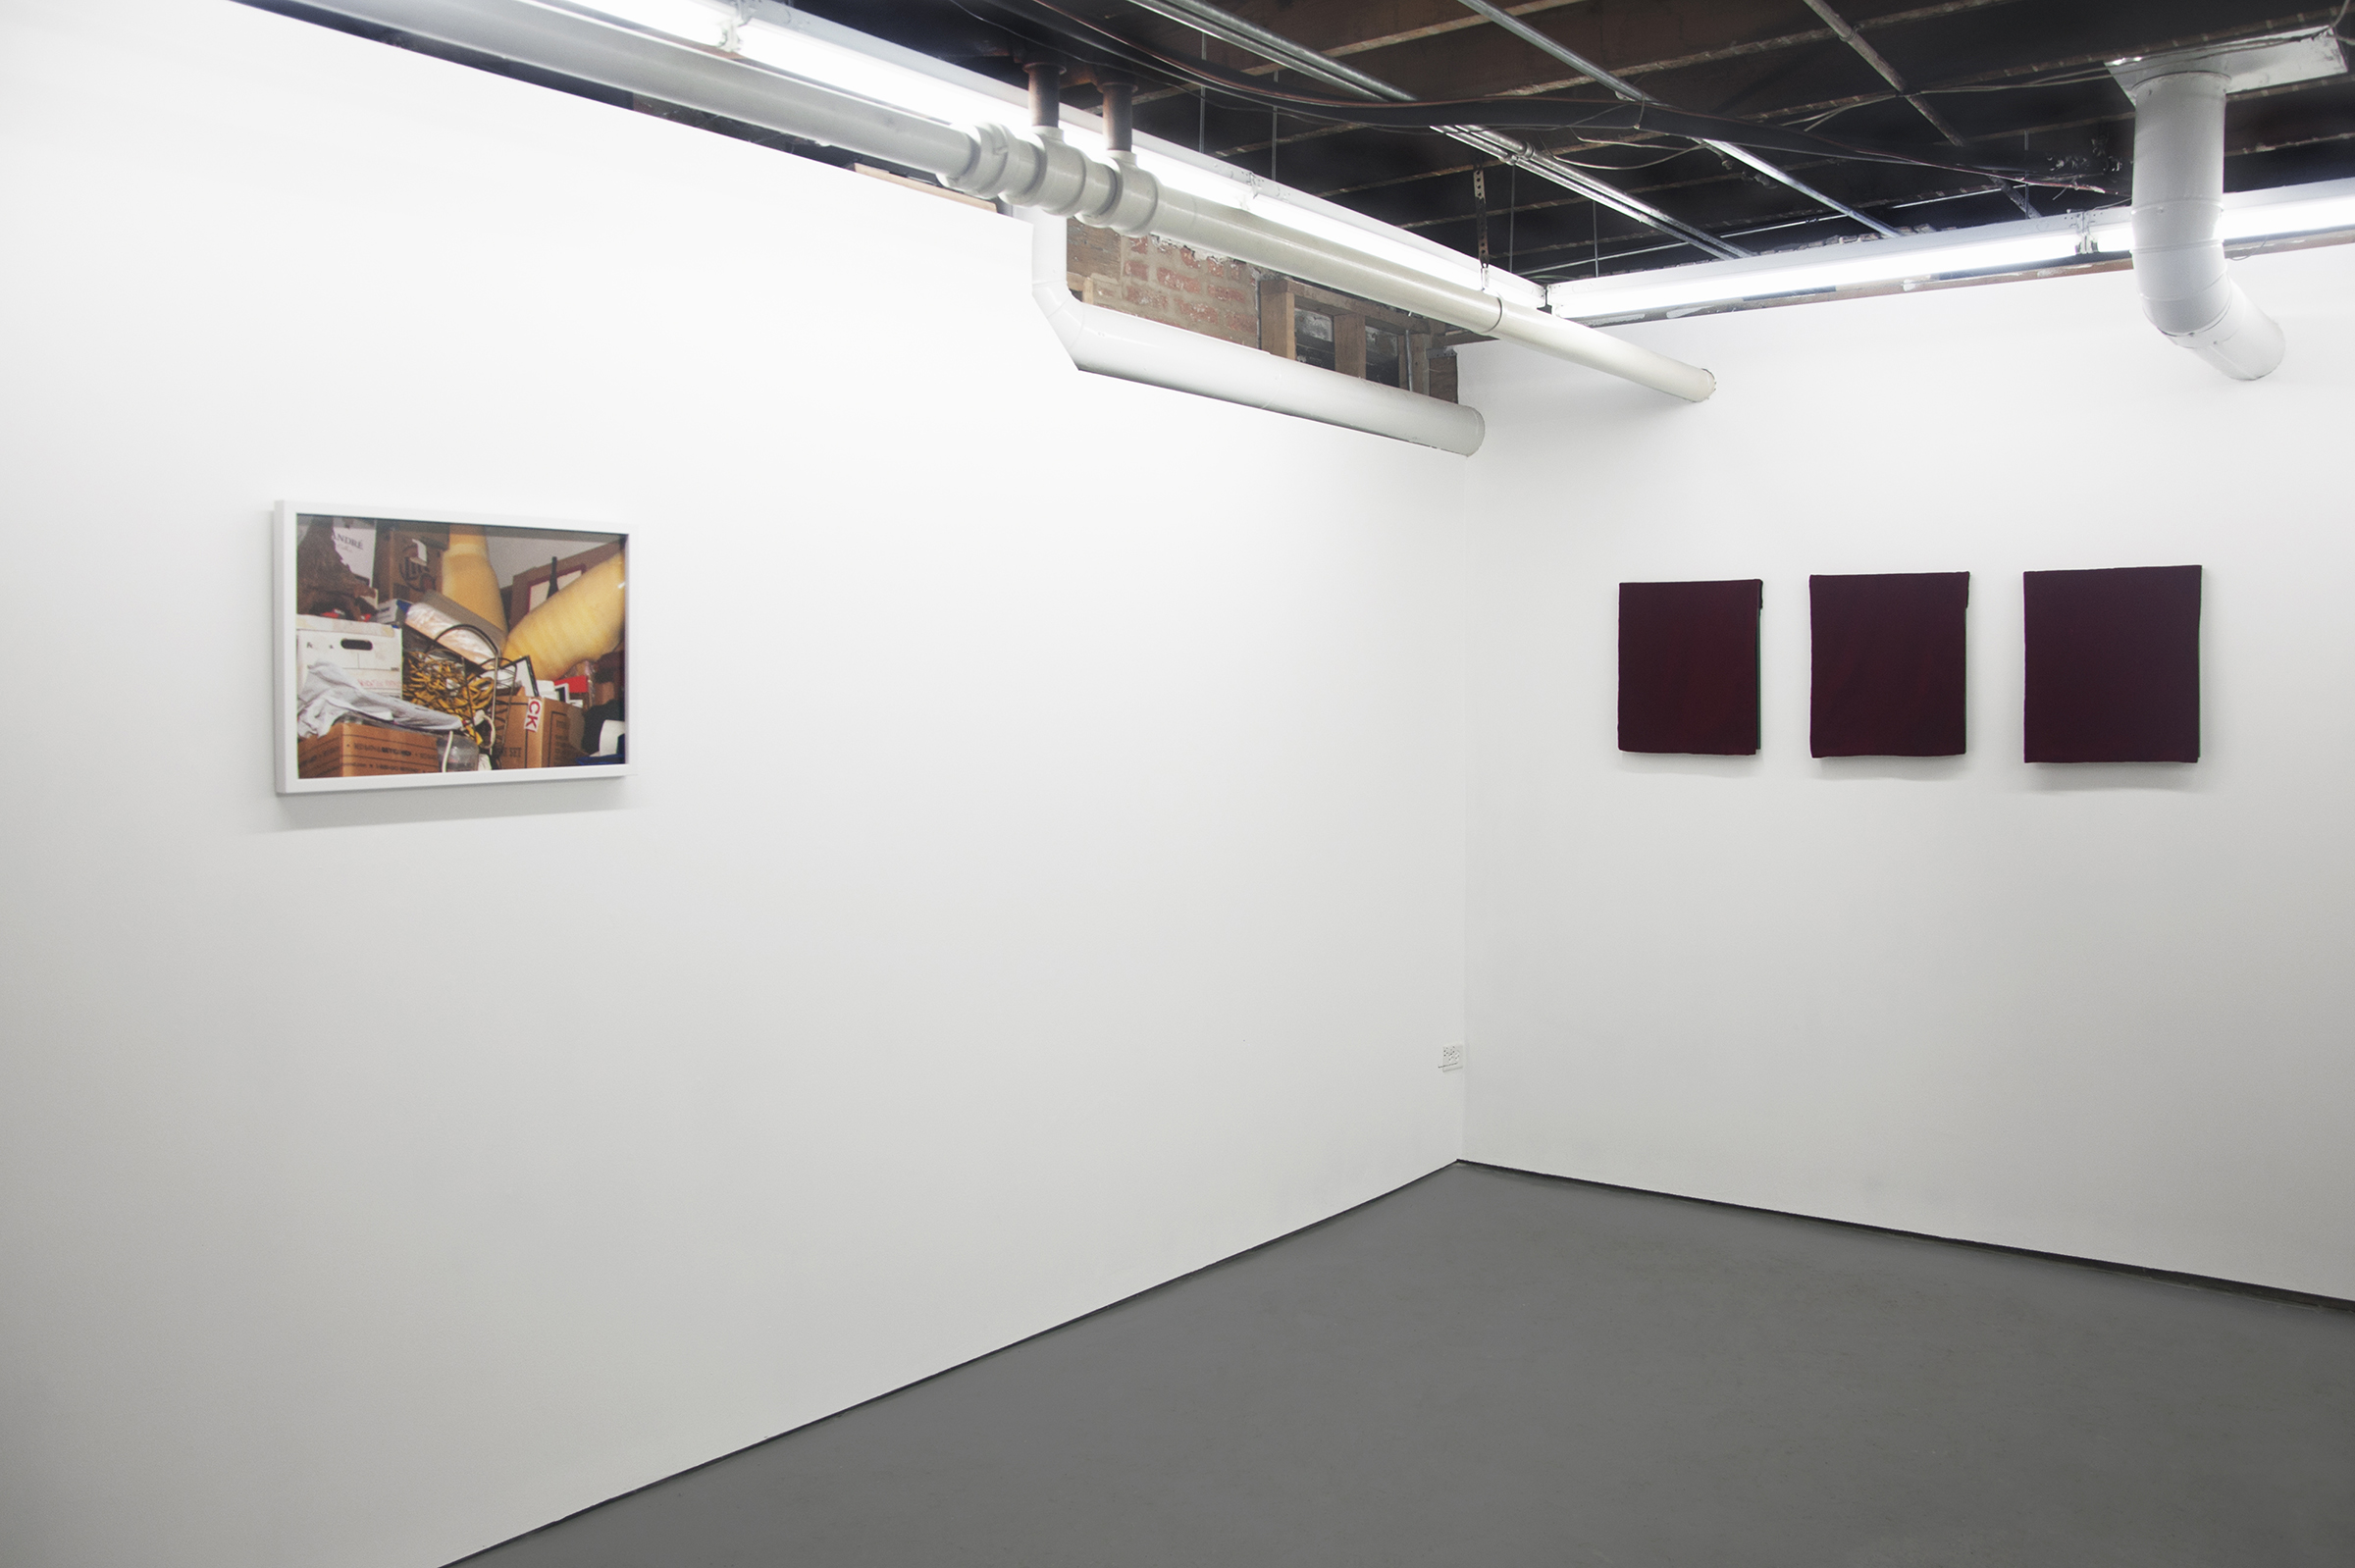 Frontward Tilt (from left to right), Ramsey Alderson, “Untitled”, 2015, Photograph; Jeremy Biles, “Ariadne's Thread”, 2015, digital print with graphite and wax crayon on newsprint with velvet veil; Jeremy Biles, “The Sensation of Time”, 2015, digital print with graphite, colored pencil, and collage on newsprint with velvet veil; Jeremy Biles, 2015, “Mirror of Tauromachy”, digital print with graphite, colored pencil, and semen on newsprint with velvet veil.